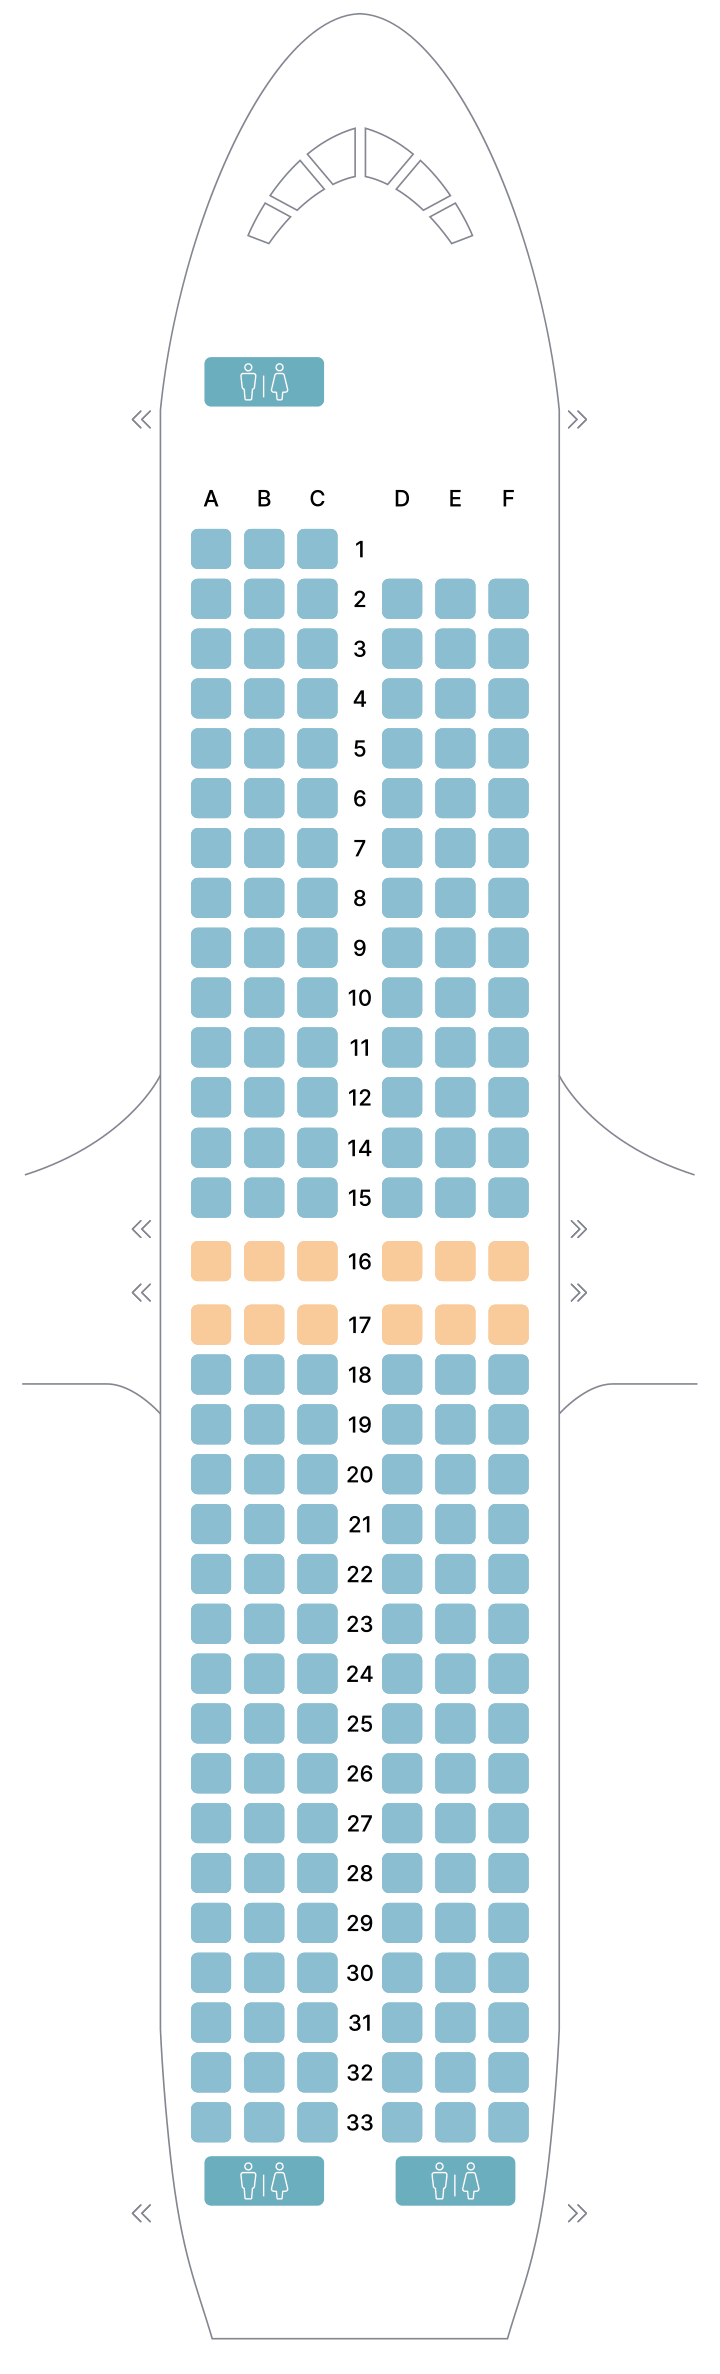 Seat Map For 737 800 Our fleet - Corendon Airlines